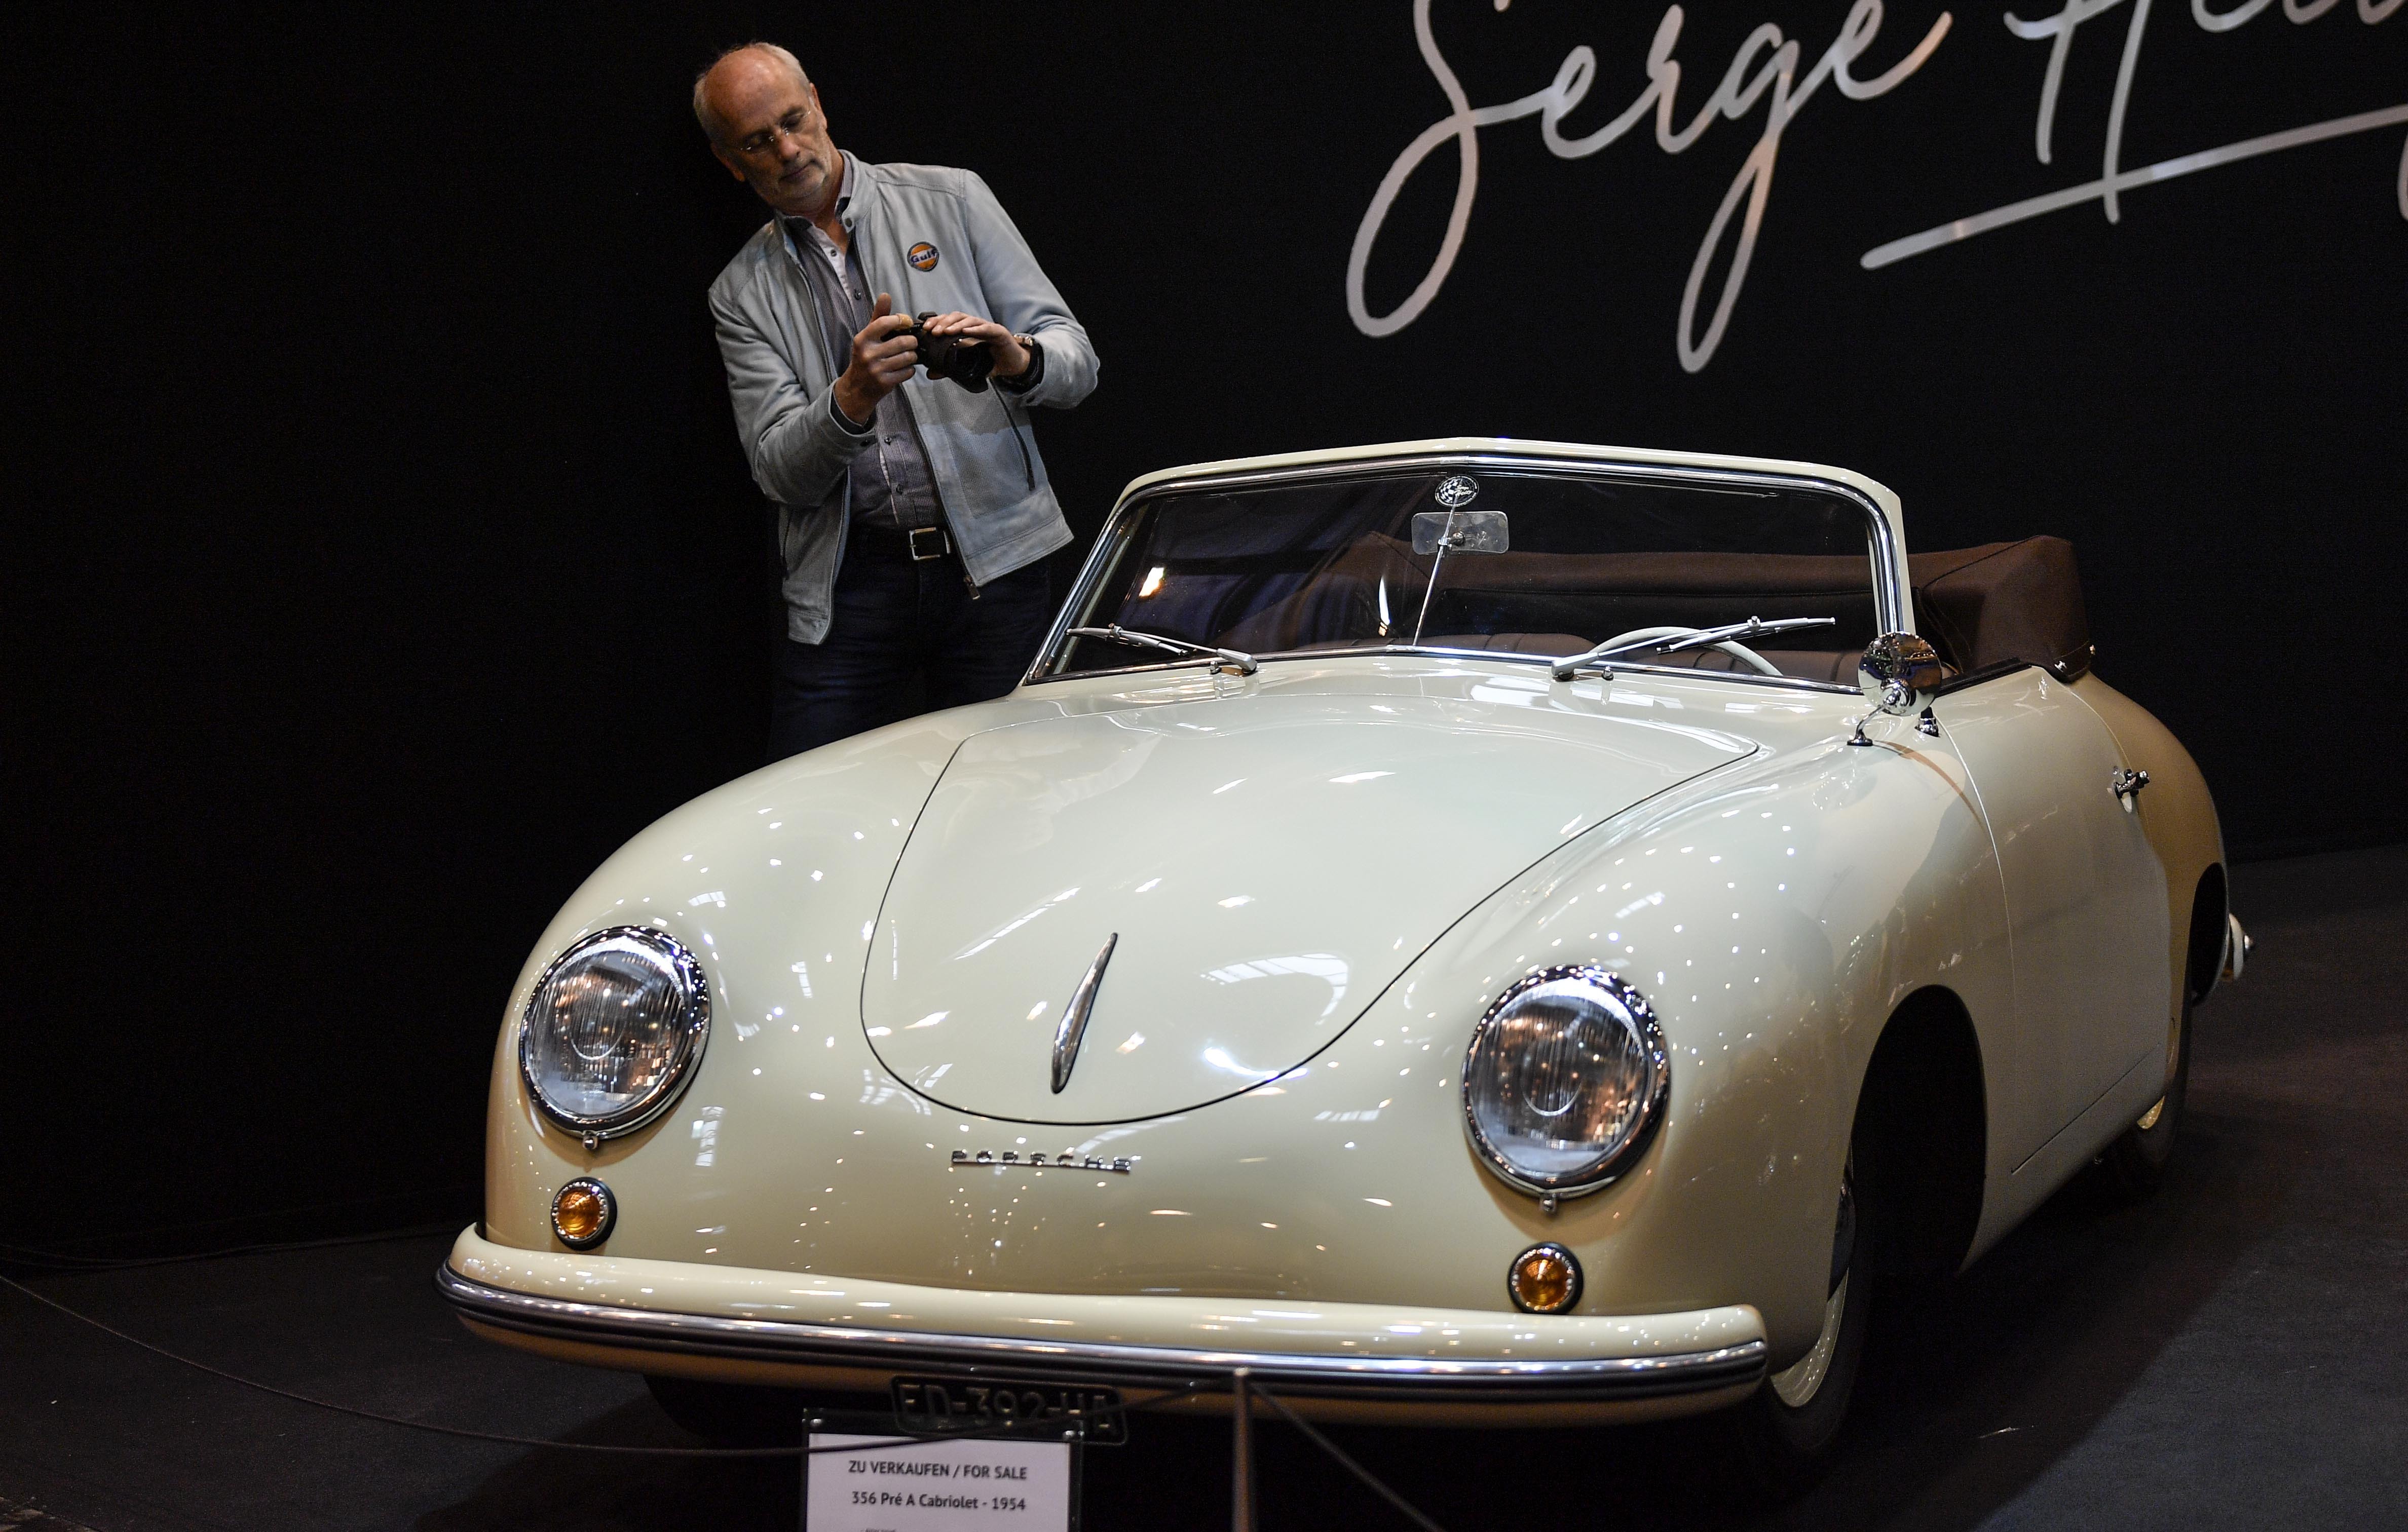 A man takes a picture of a Porsche 356 Cabriolet from 1954 on sale at the World Show for Vintage, Classic and Prestige Automobiles Techno-Classica in Essen, Germany, Friday, April 12, 2019. (AP Photo/Martin Meissner)